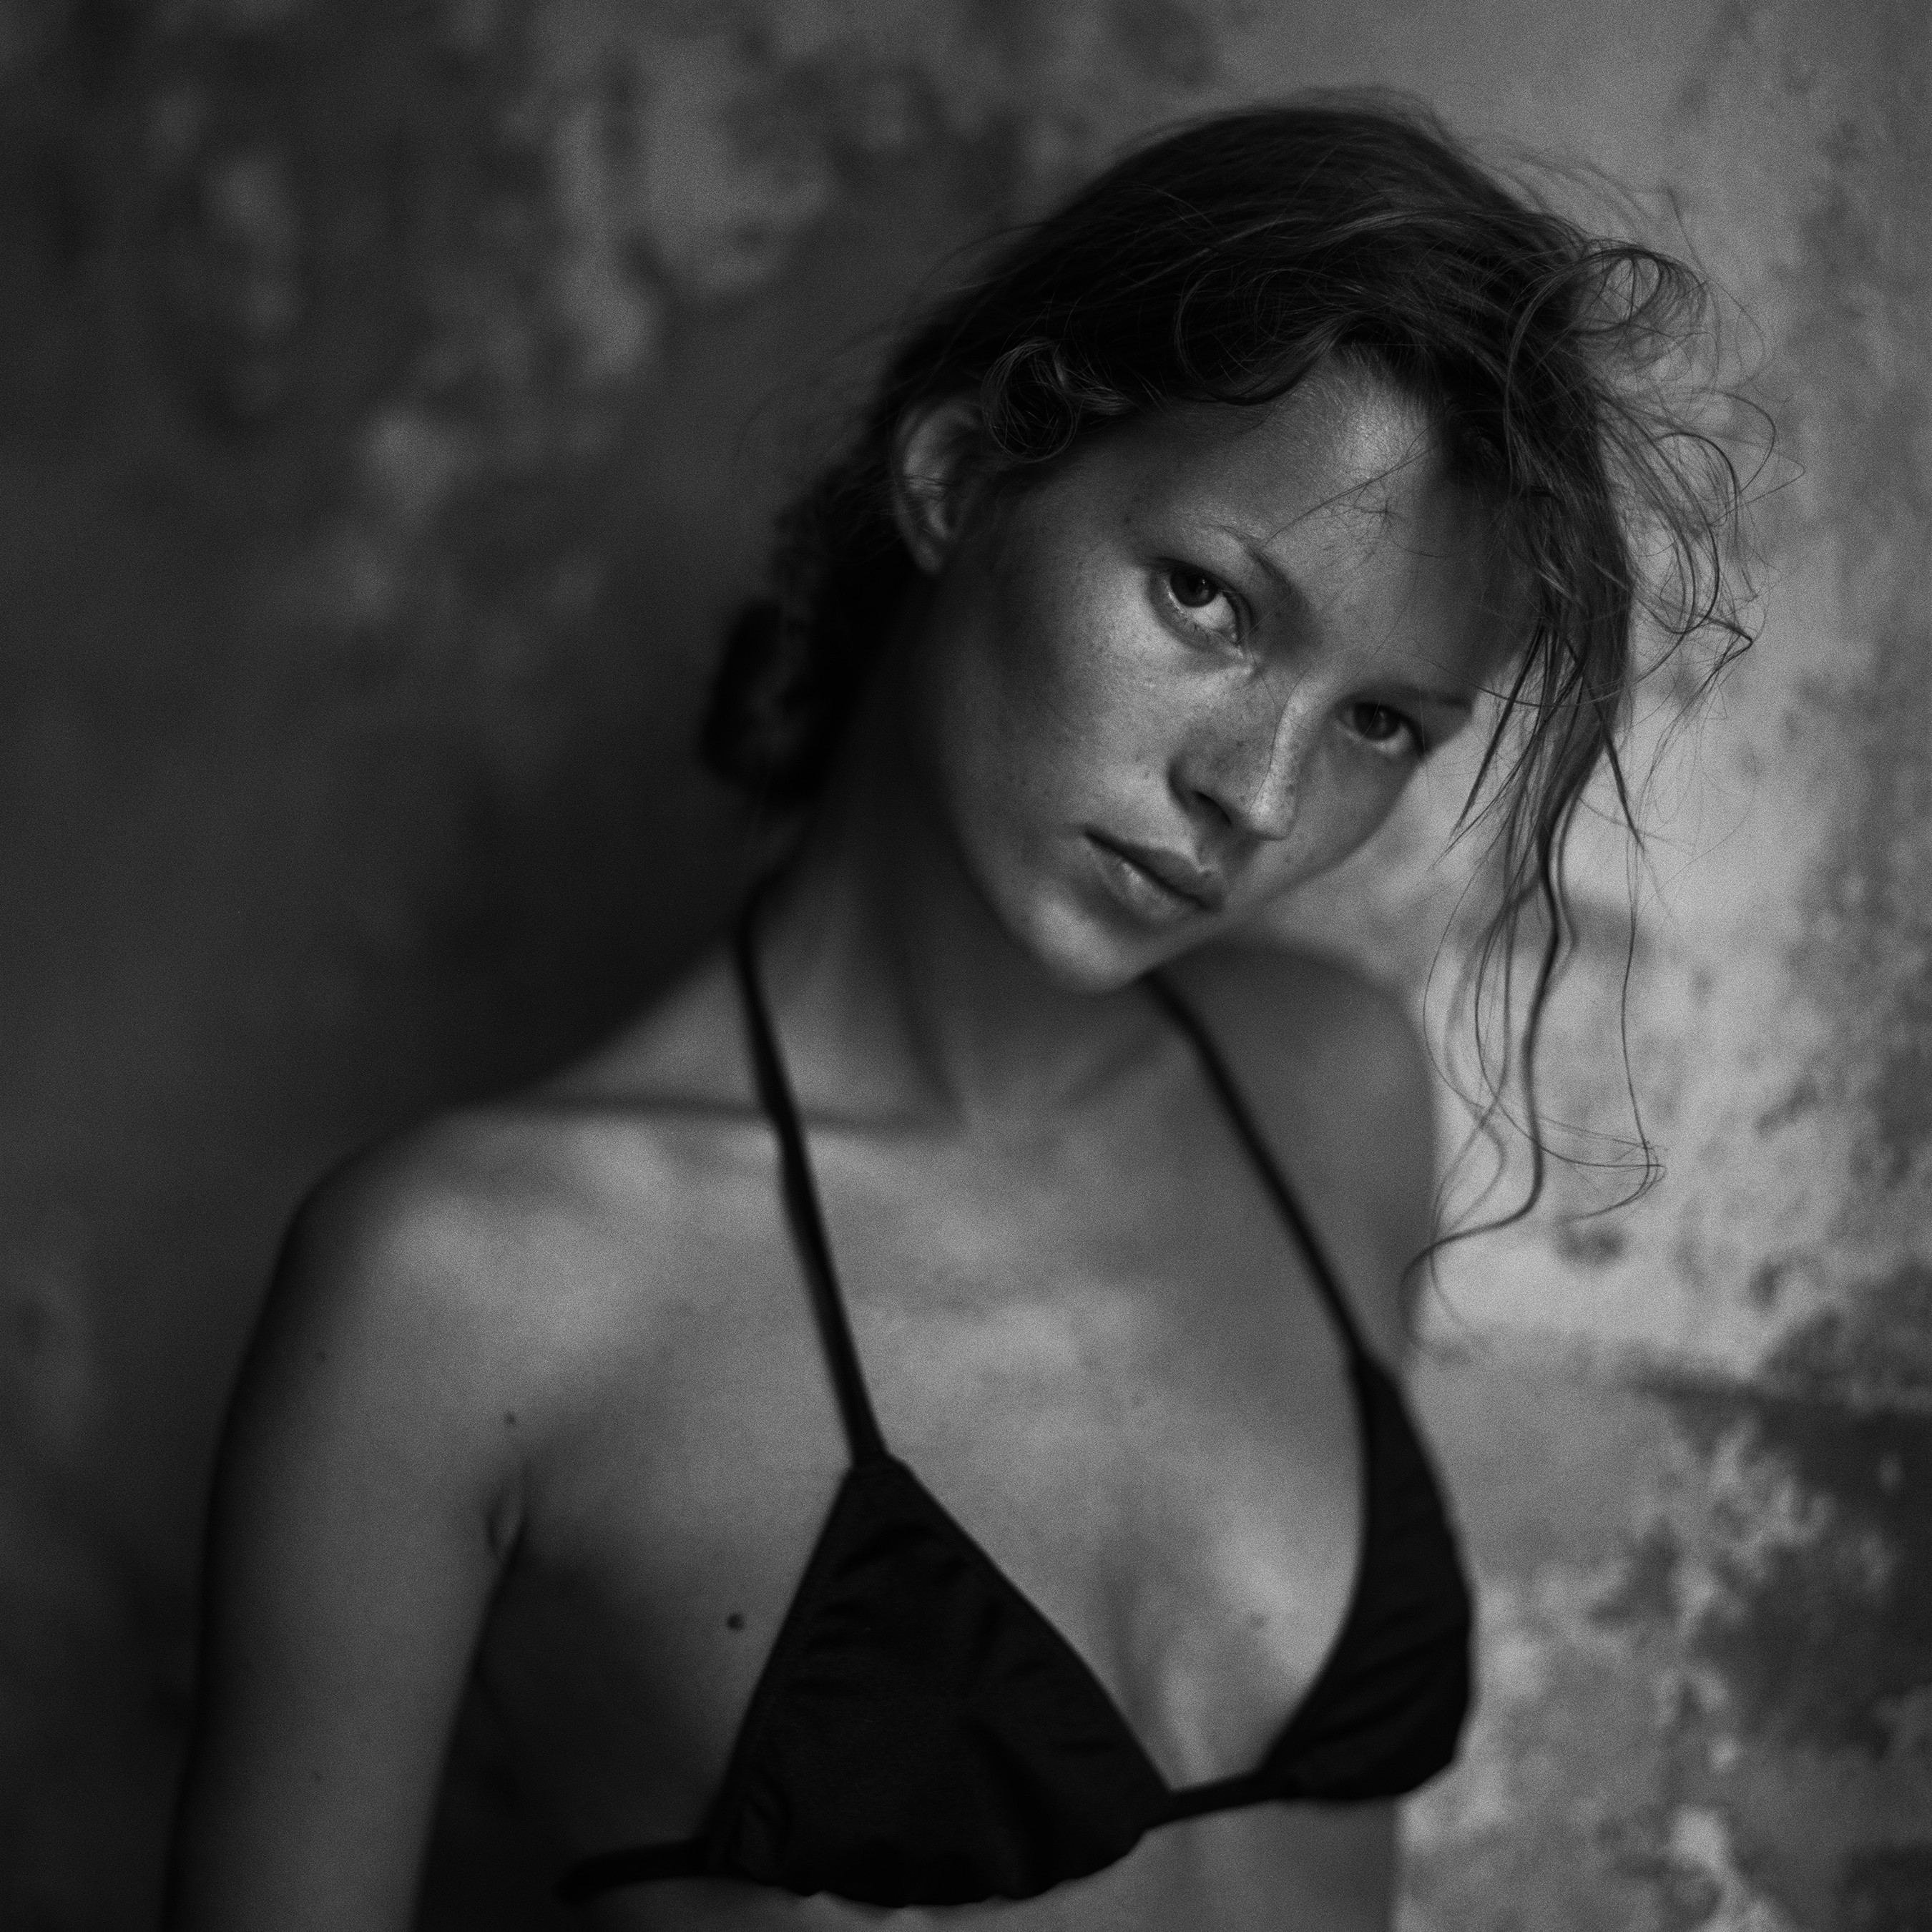 Mario Sorrenti shares unseen Kate Moss photos from the 90s